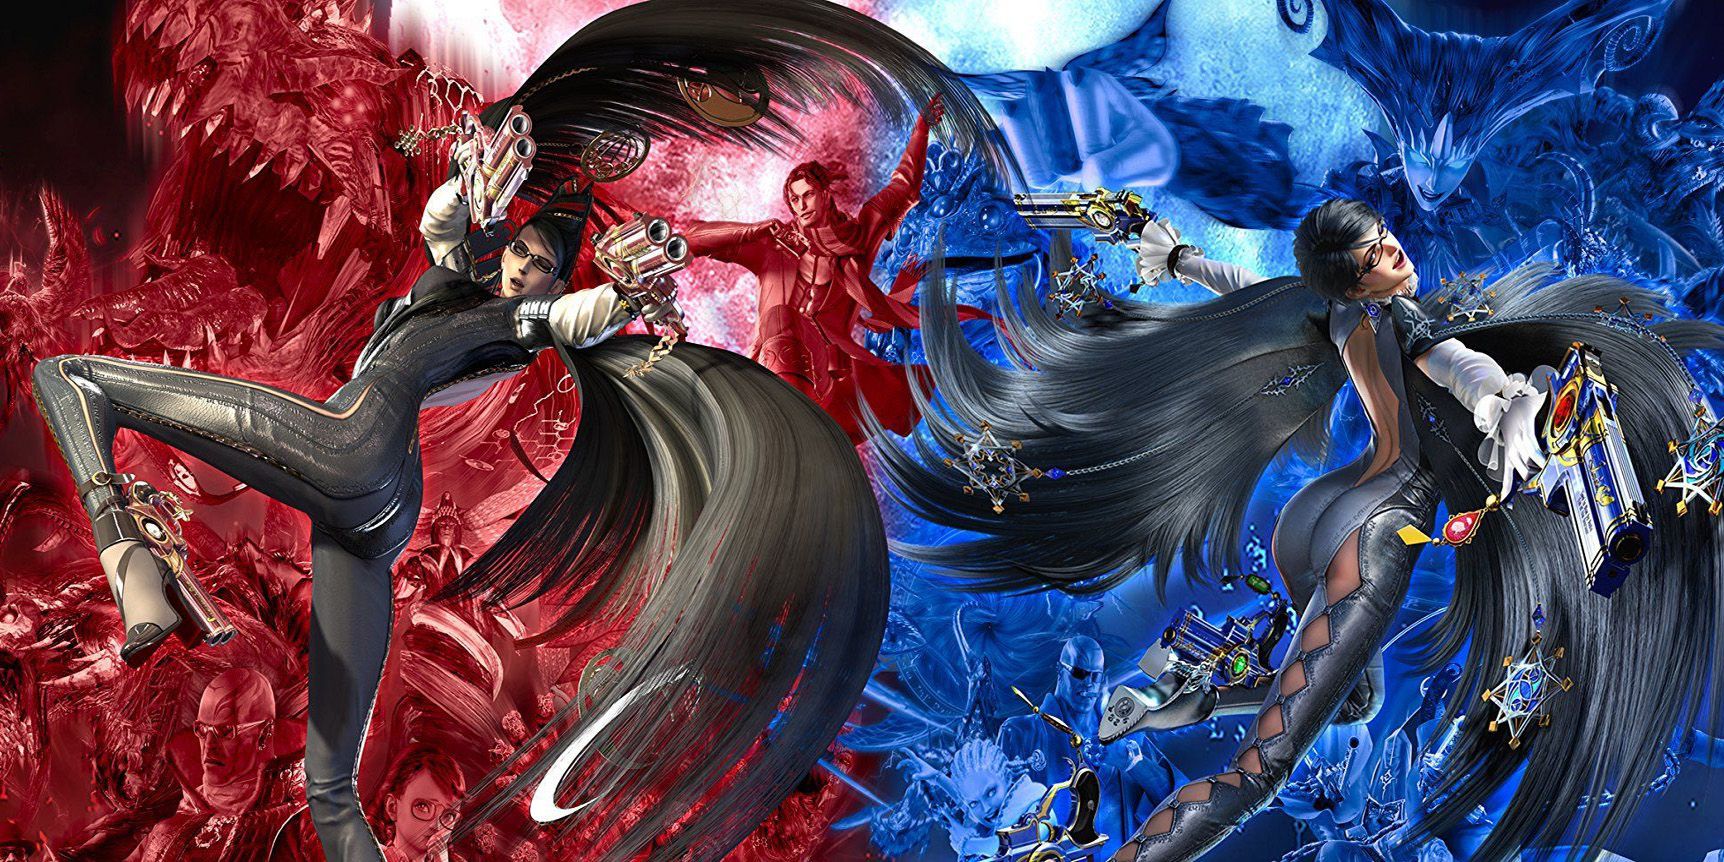  Bayonetta Non-Stop Climax Edition - Bayonetta's Designs From The First And Second Games Posing With Their Guns